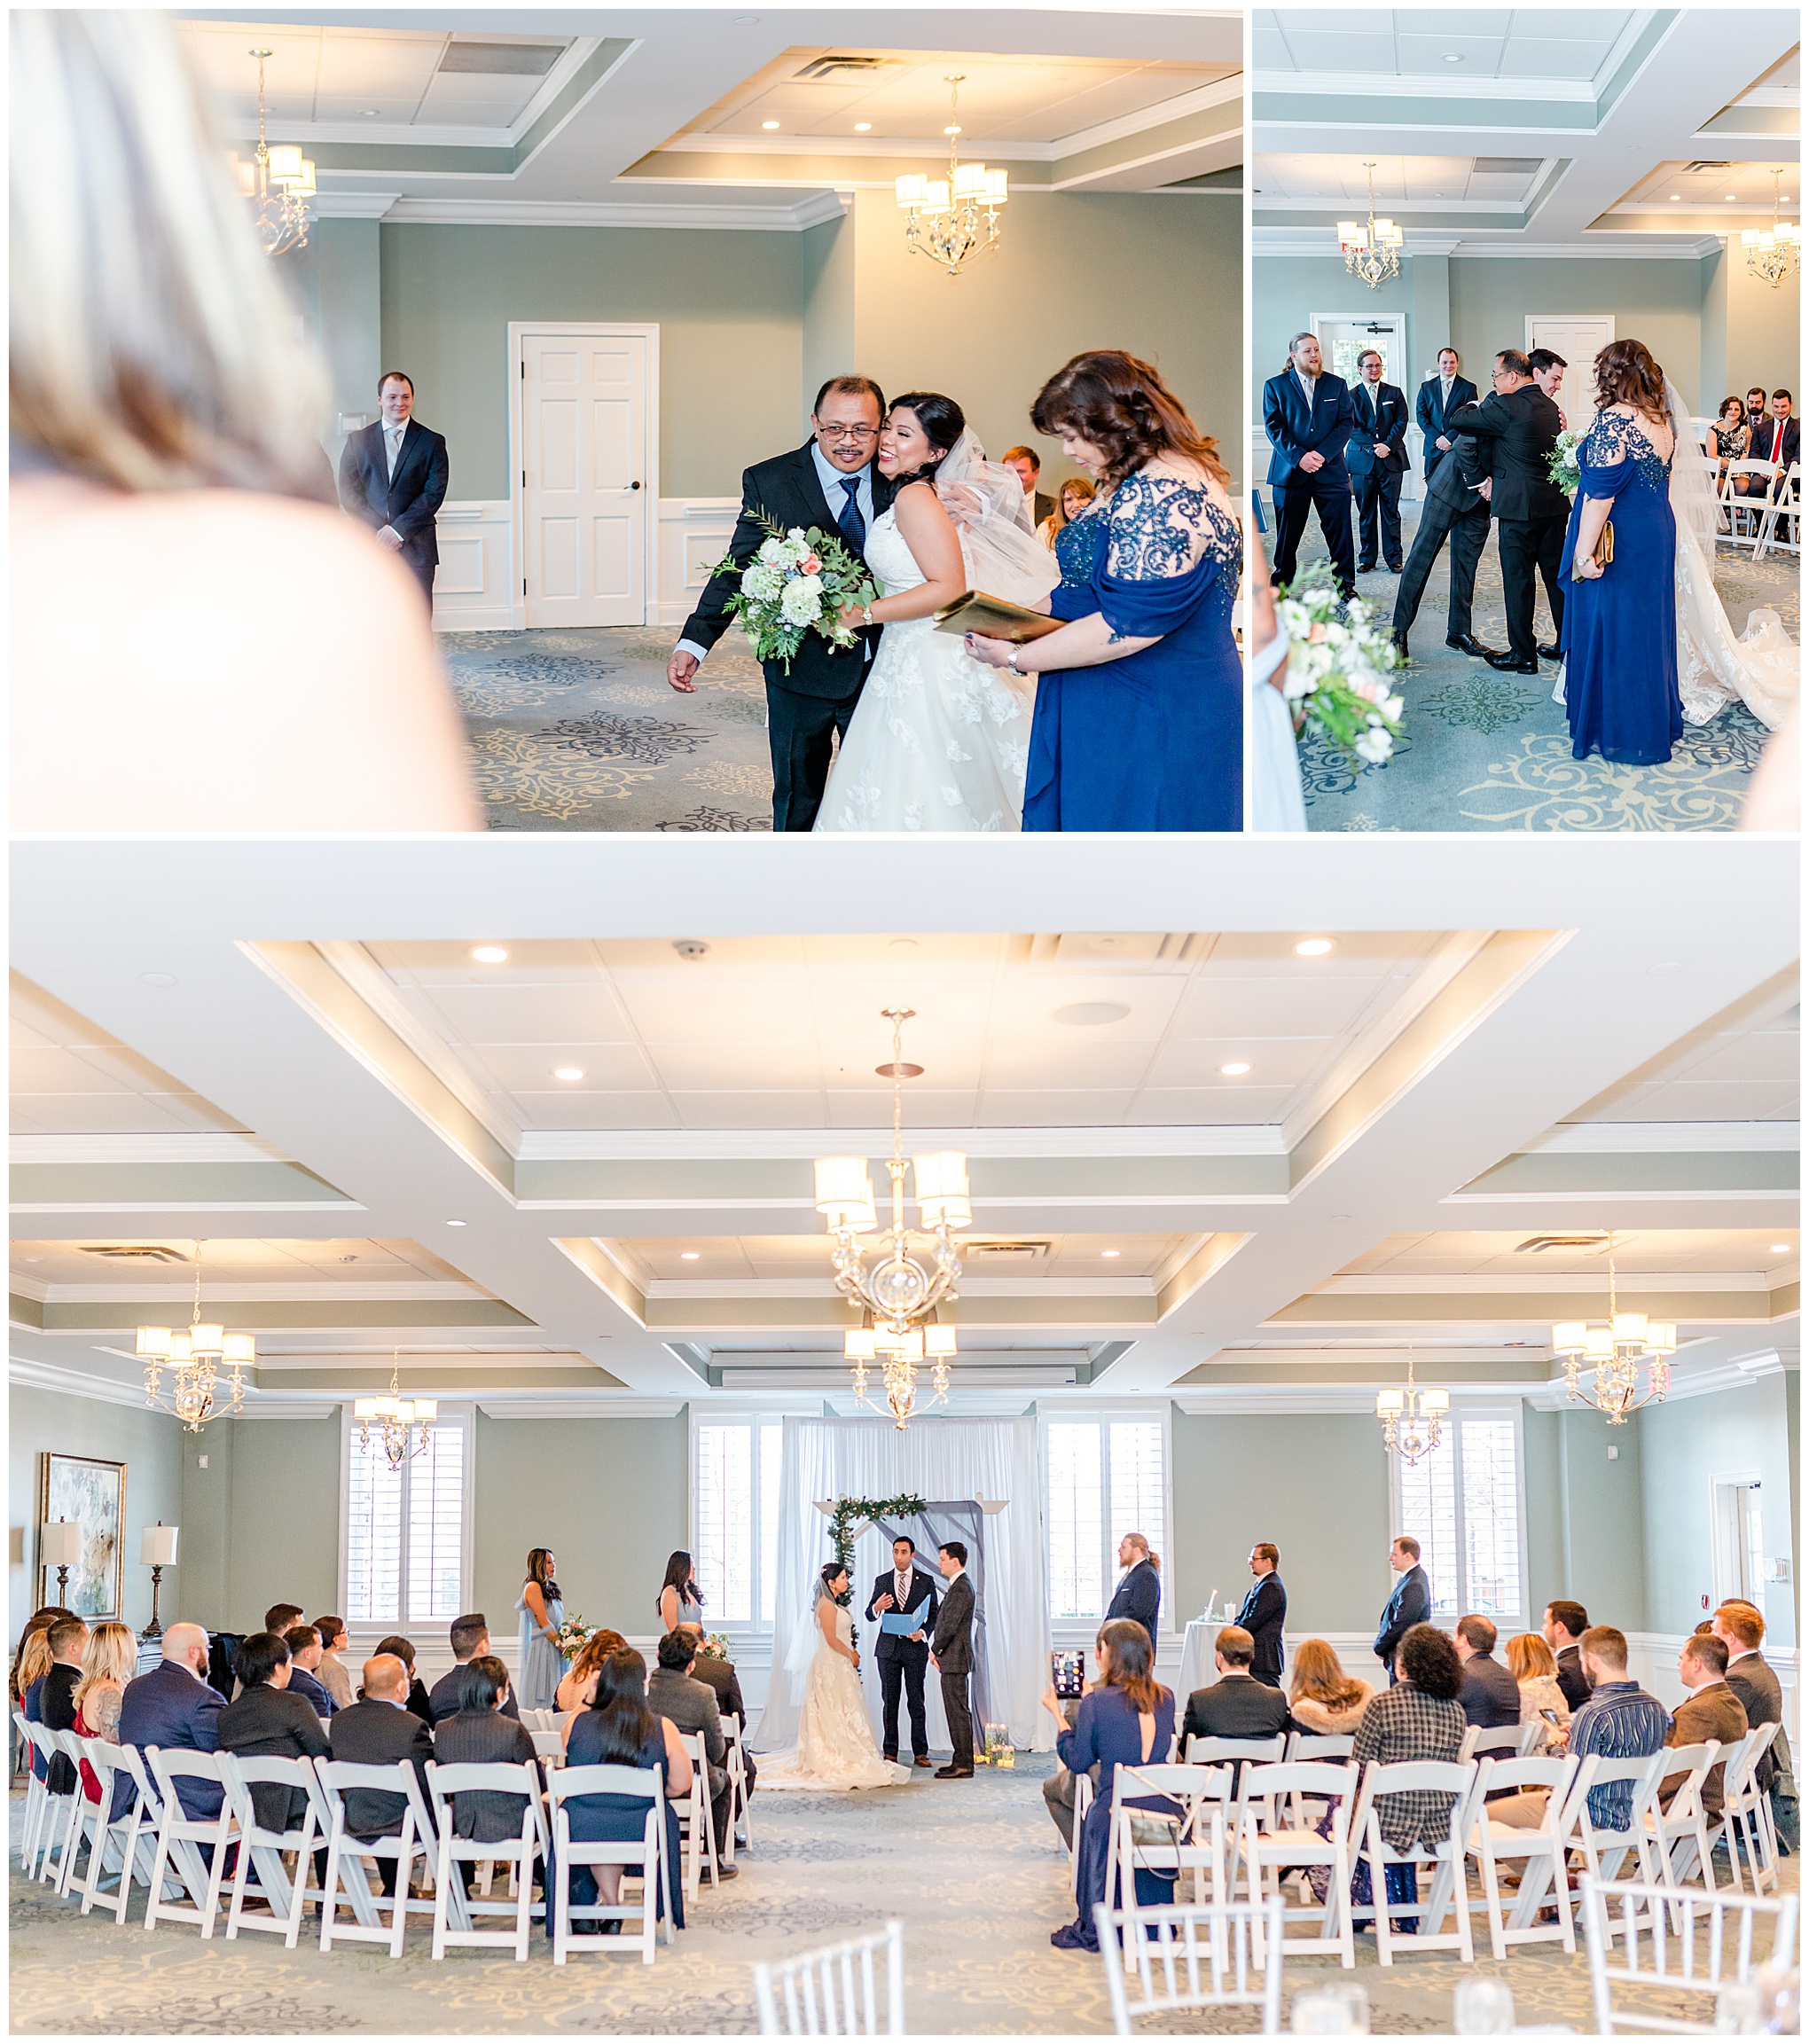 Regency at Dominion Valley wedding, Virginia country club wedding, Haymarket Virginia wedding, northern Virginia wedding, winter wedding, winter wedding aesthetic, DC micro wedding, northern Virginia wedding venues, classic winter wedding, Rachel E.H. Photography, bride walking down aisle, bride walking with parents